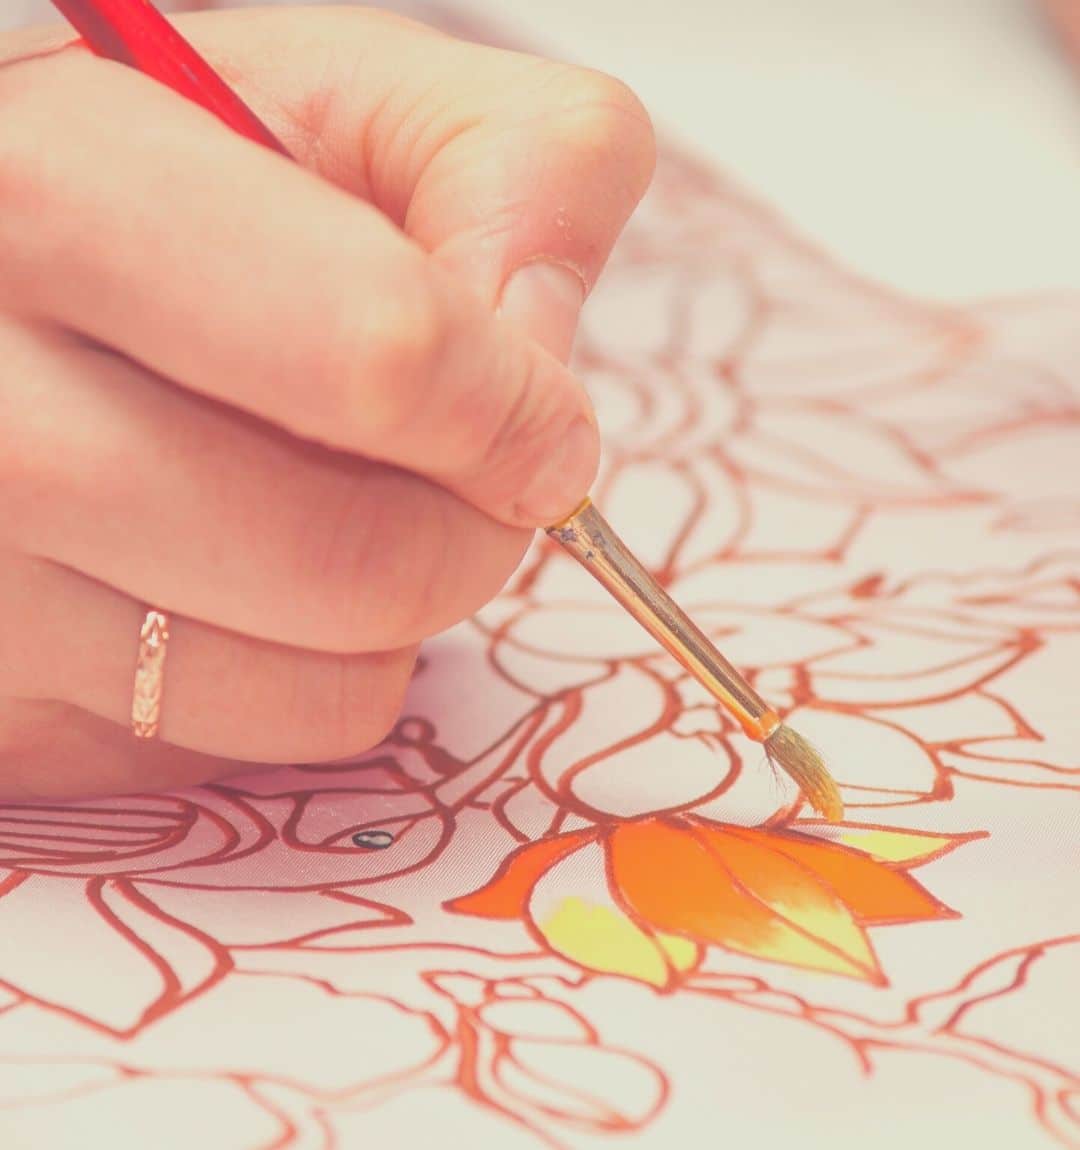 benefits of coloring for elderly | colouring for adults | coloring and anxiety